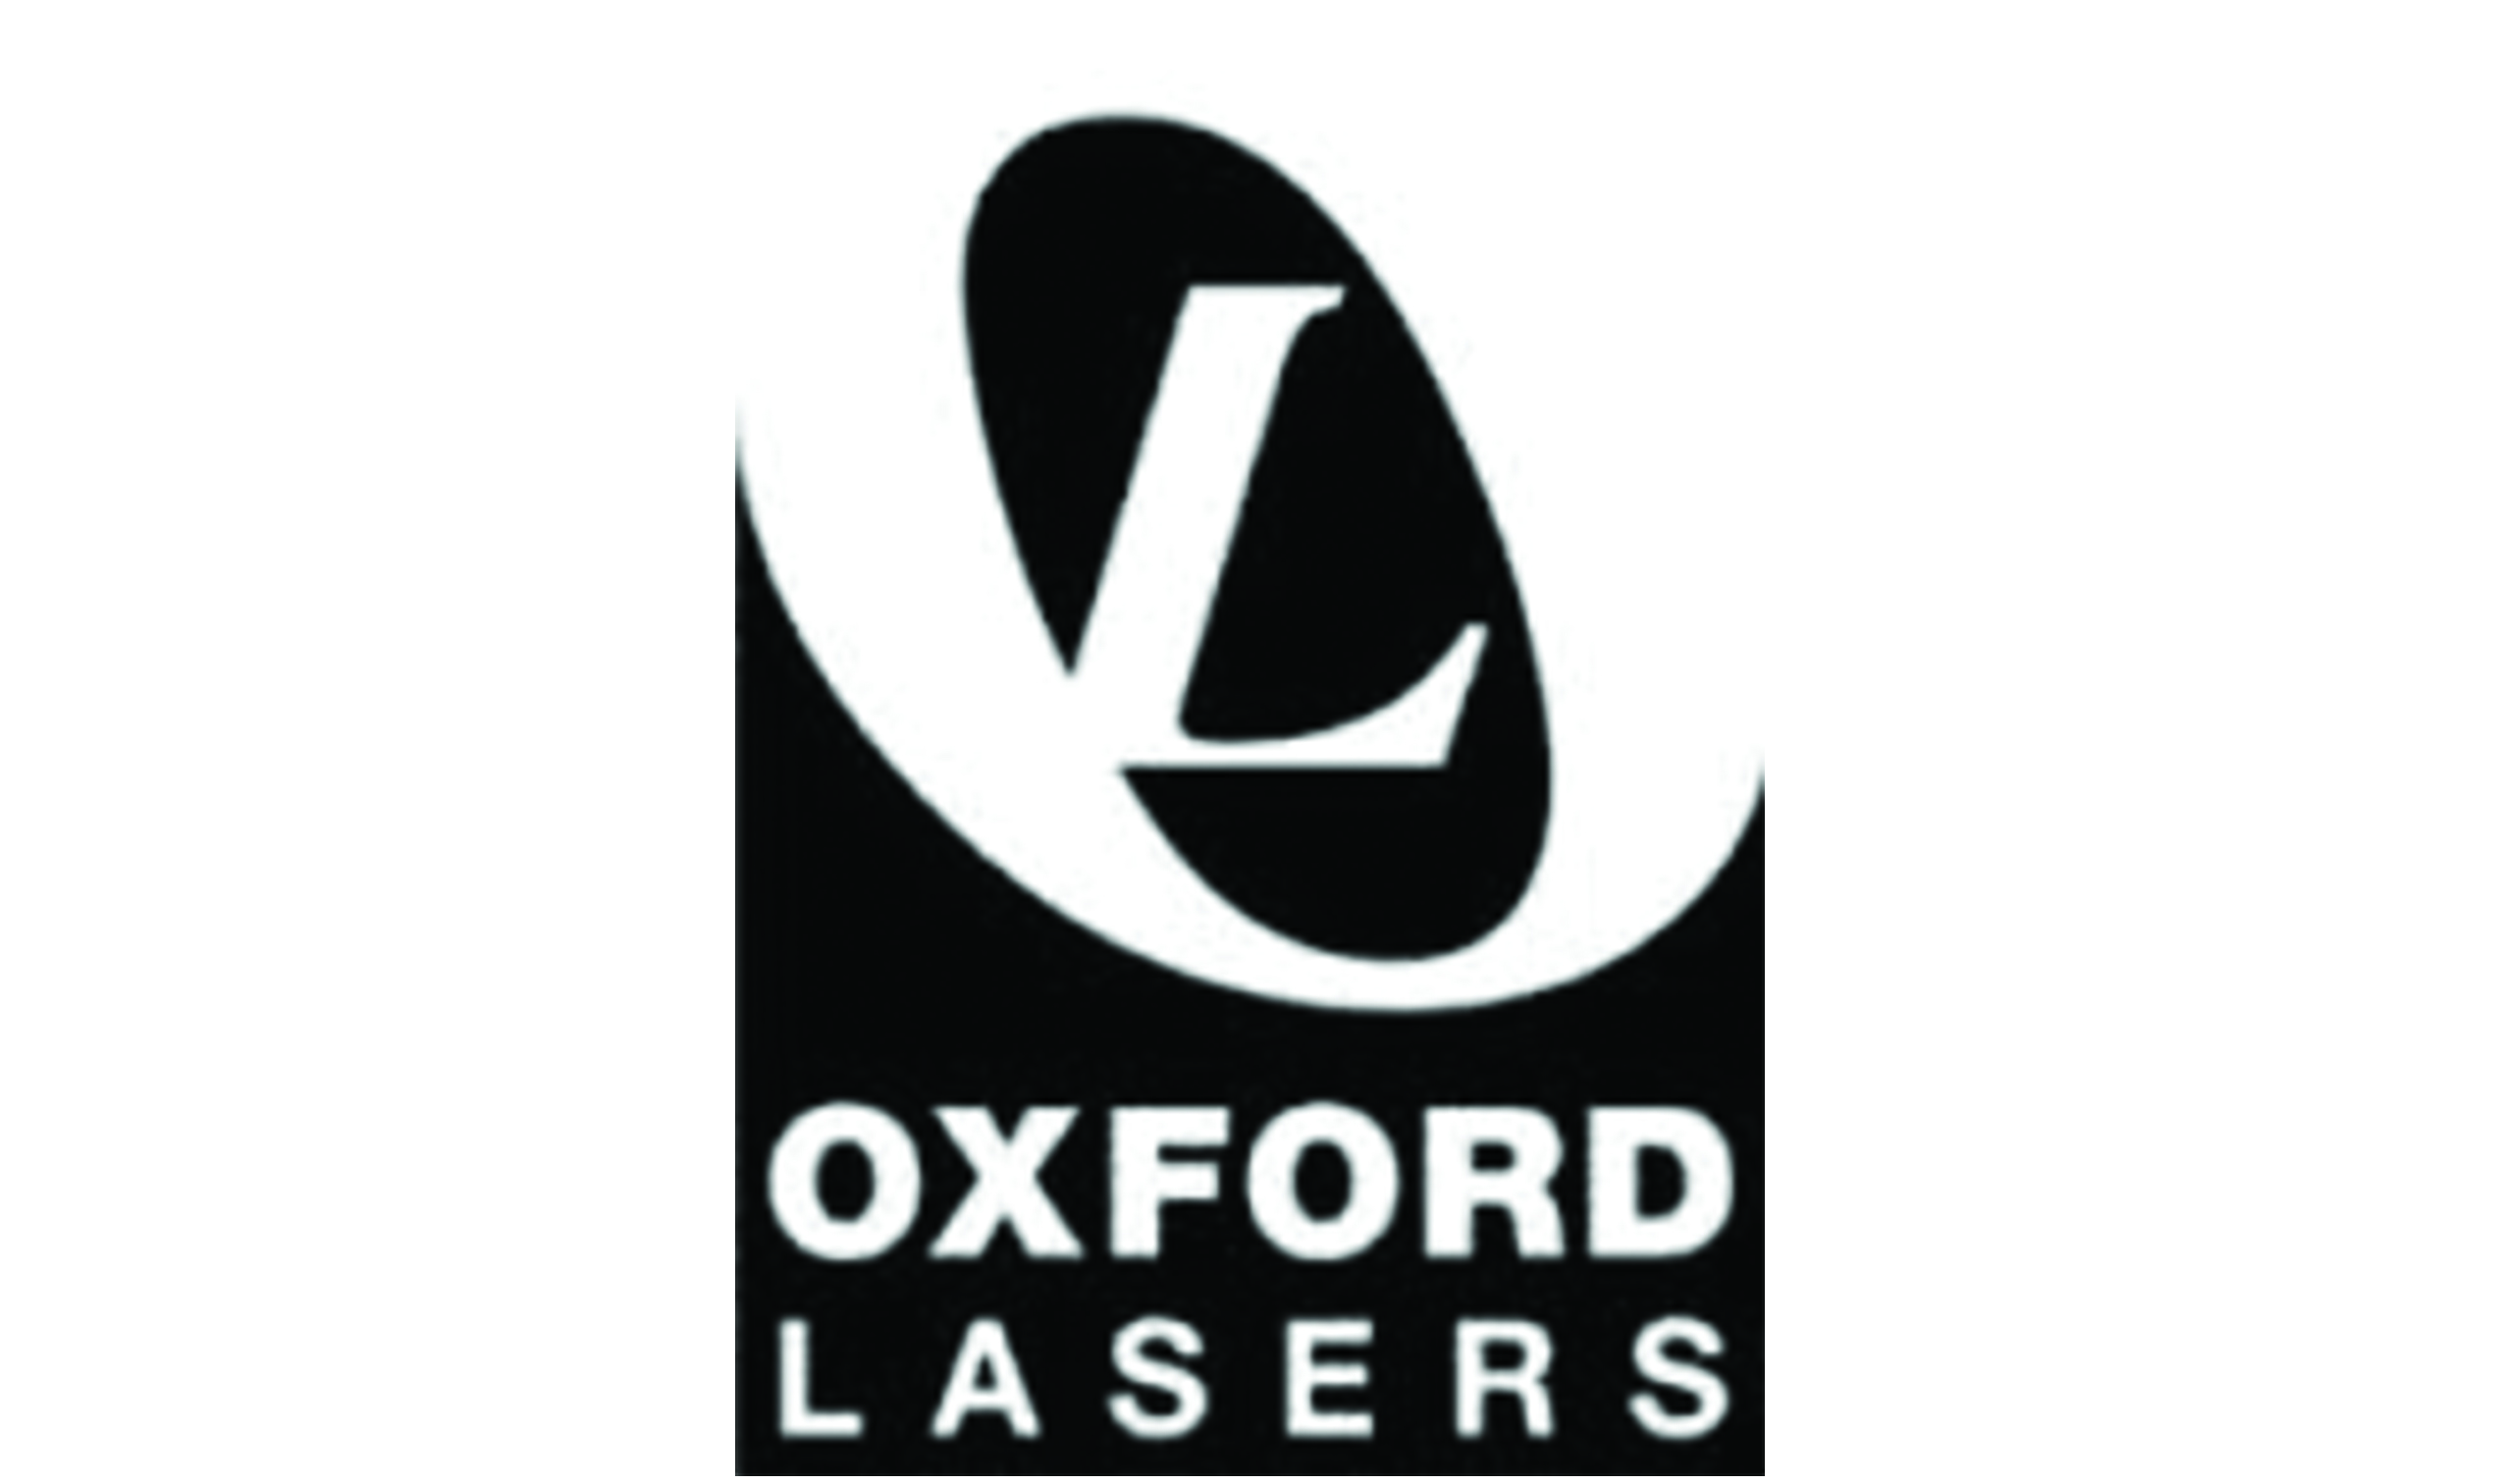 ILASS 2018 Chicago Exhibitor Oxford Lasers